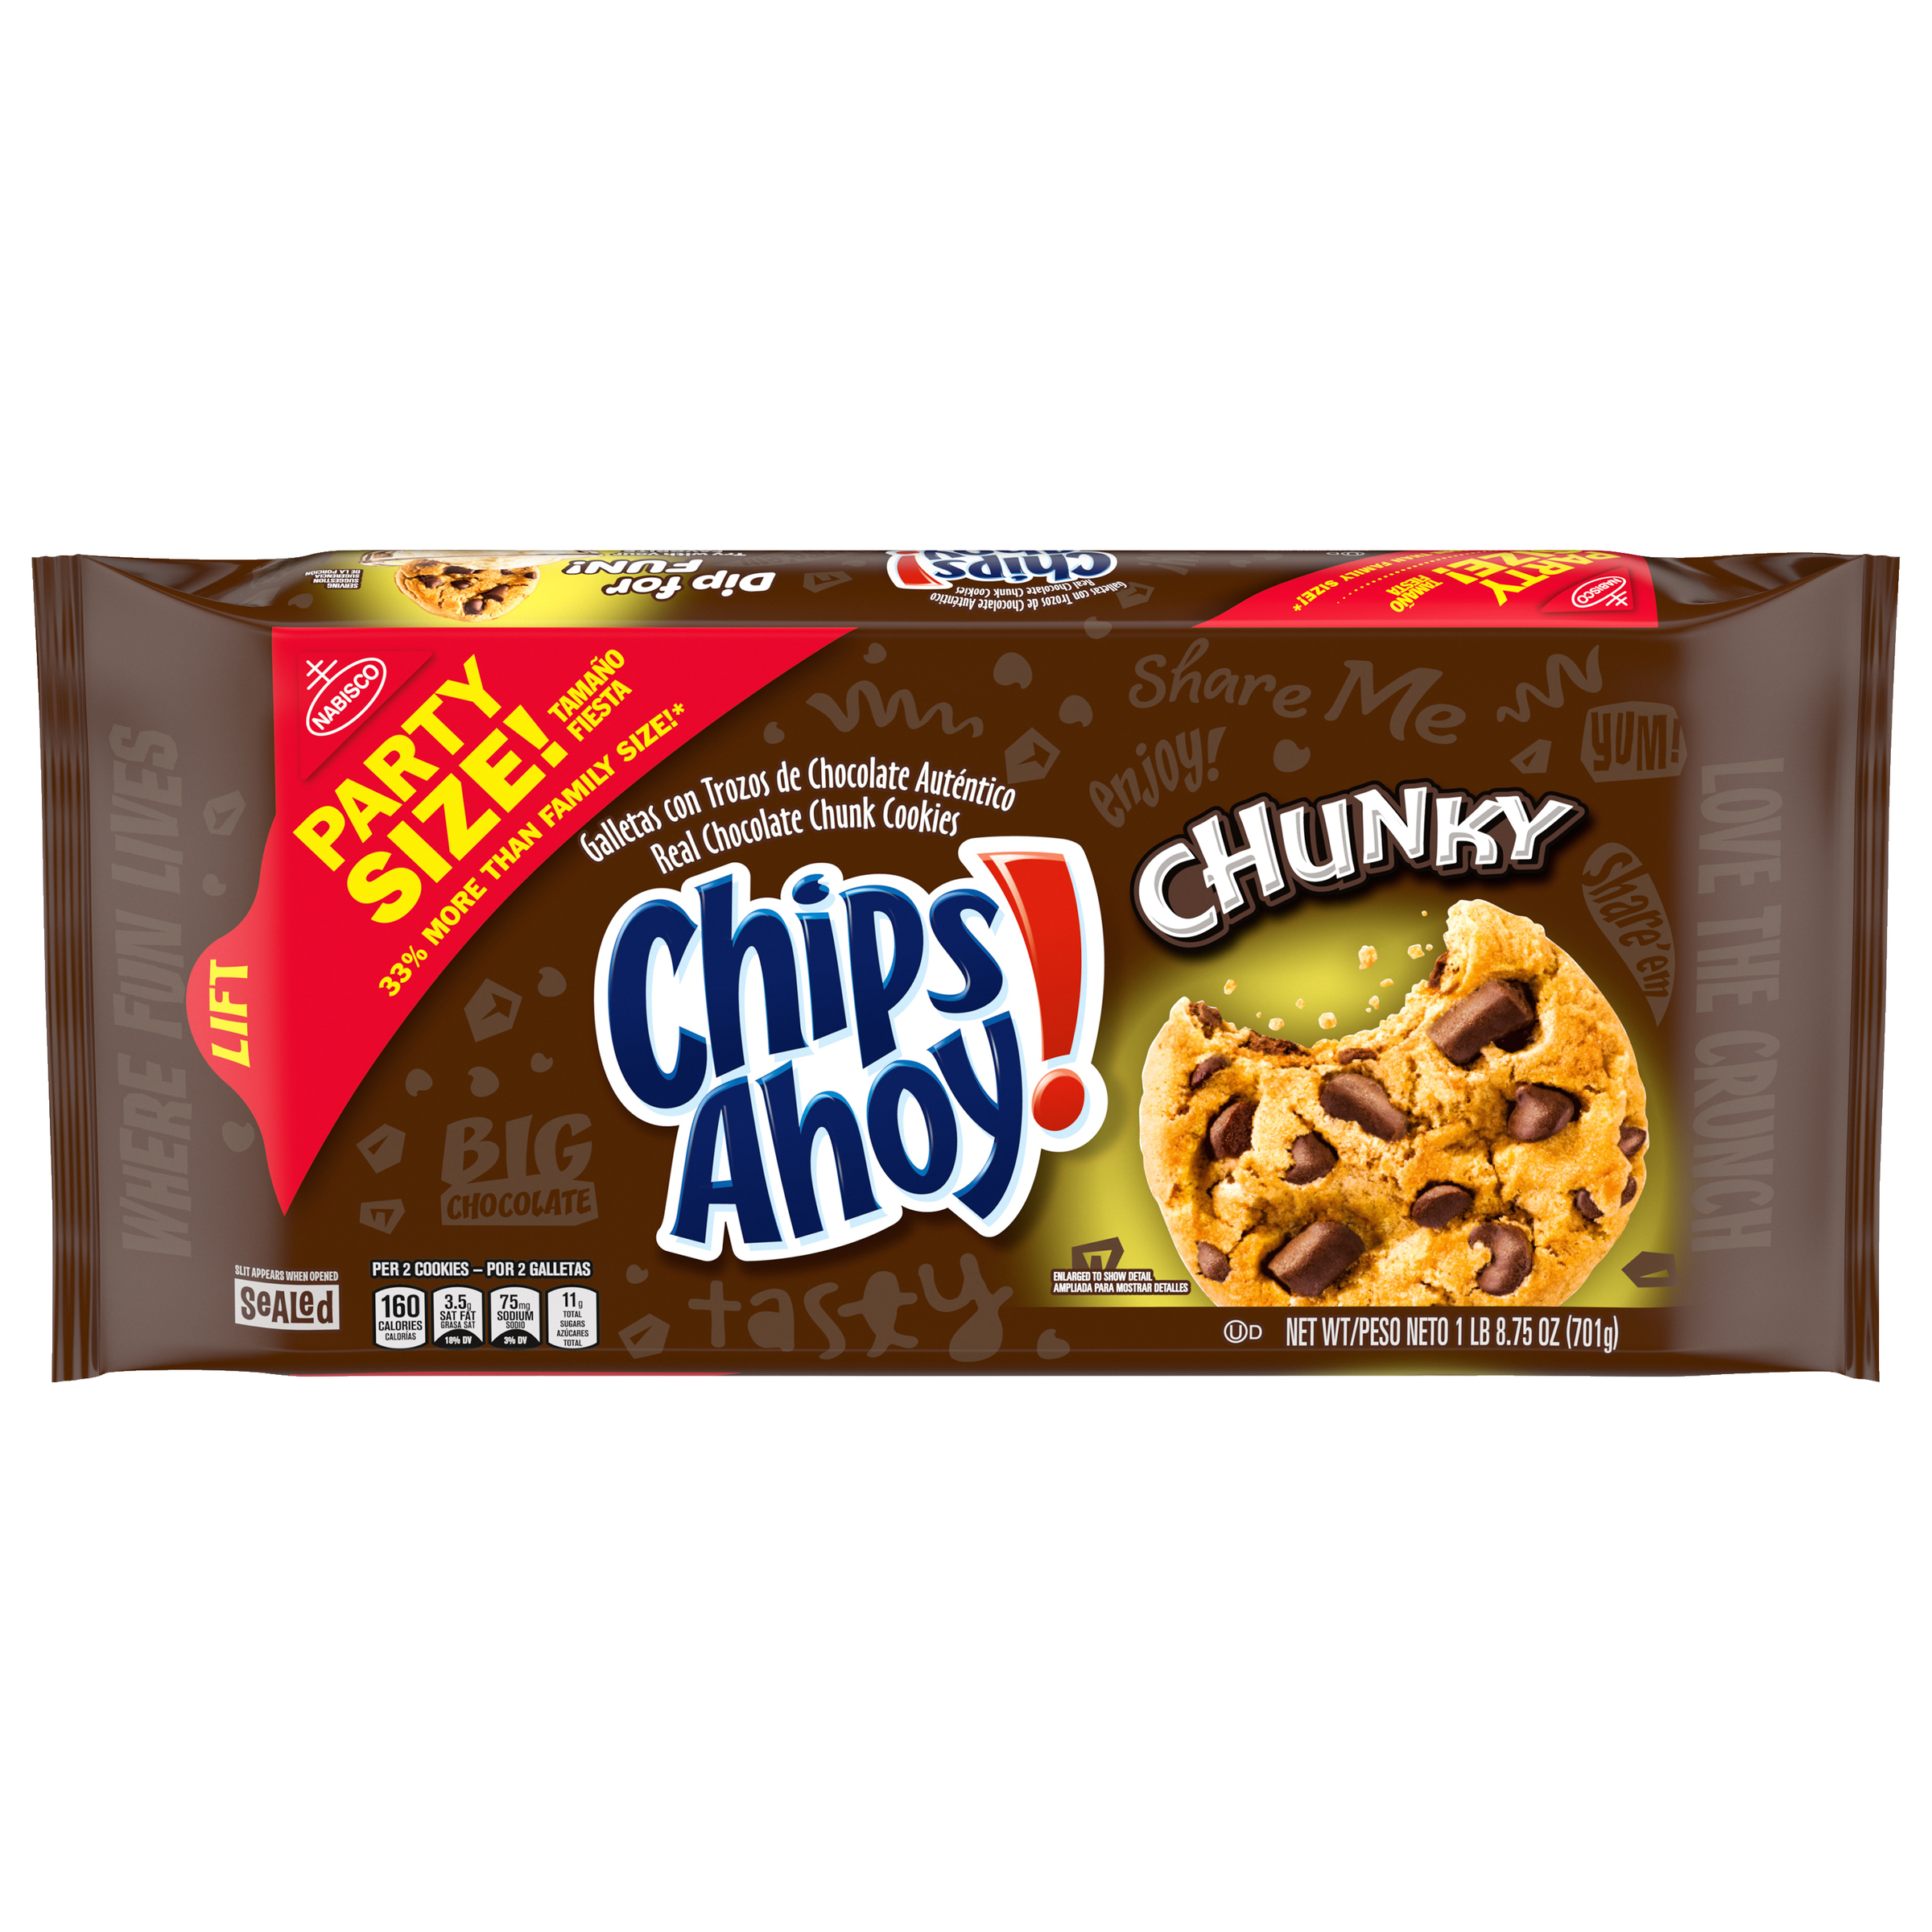 CHIPS AHOY! Chunky Cookies 1.55 LB